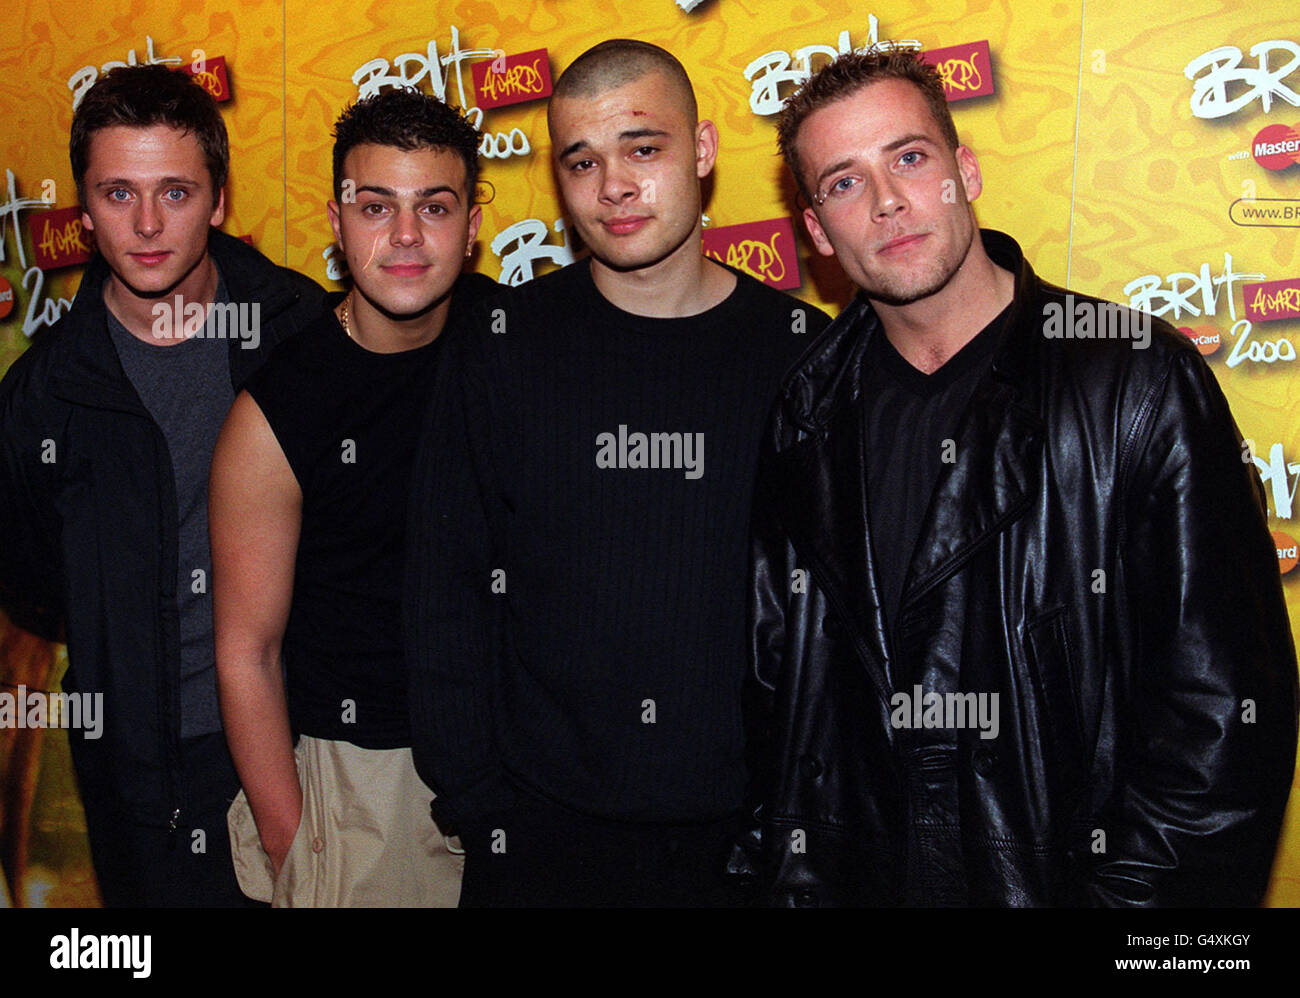 Four members of the pop group Five (L-R) Ritchie Neville, Scott Robinson, Sean Conlon and Jason Brown during the press launch of The Brit Awards 2000 in London. Fifth member Richard Breen was unable to attend due to having his wisdom teeth removed. * The awards take place at London's Earl's Court 2 on March 3 2000 to be hosted by Davina McCall. Stock Photo